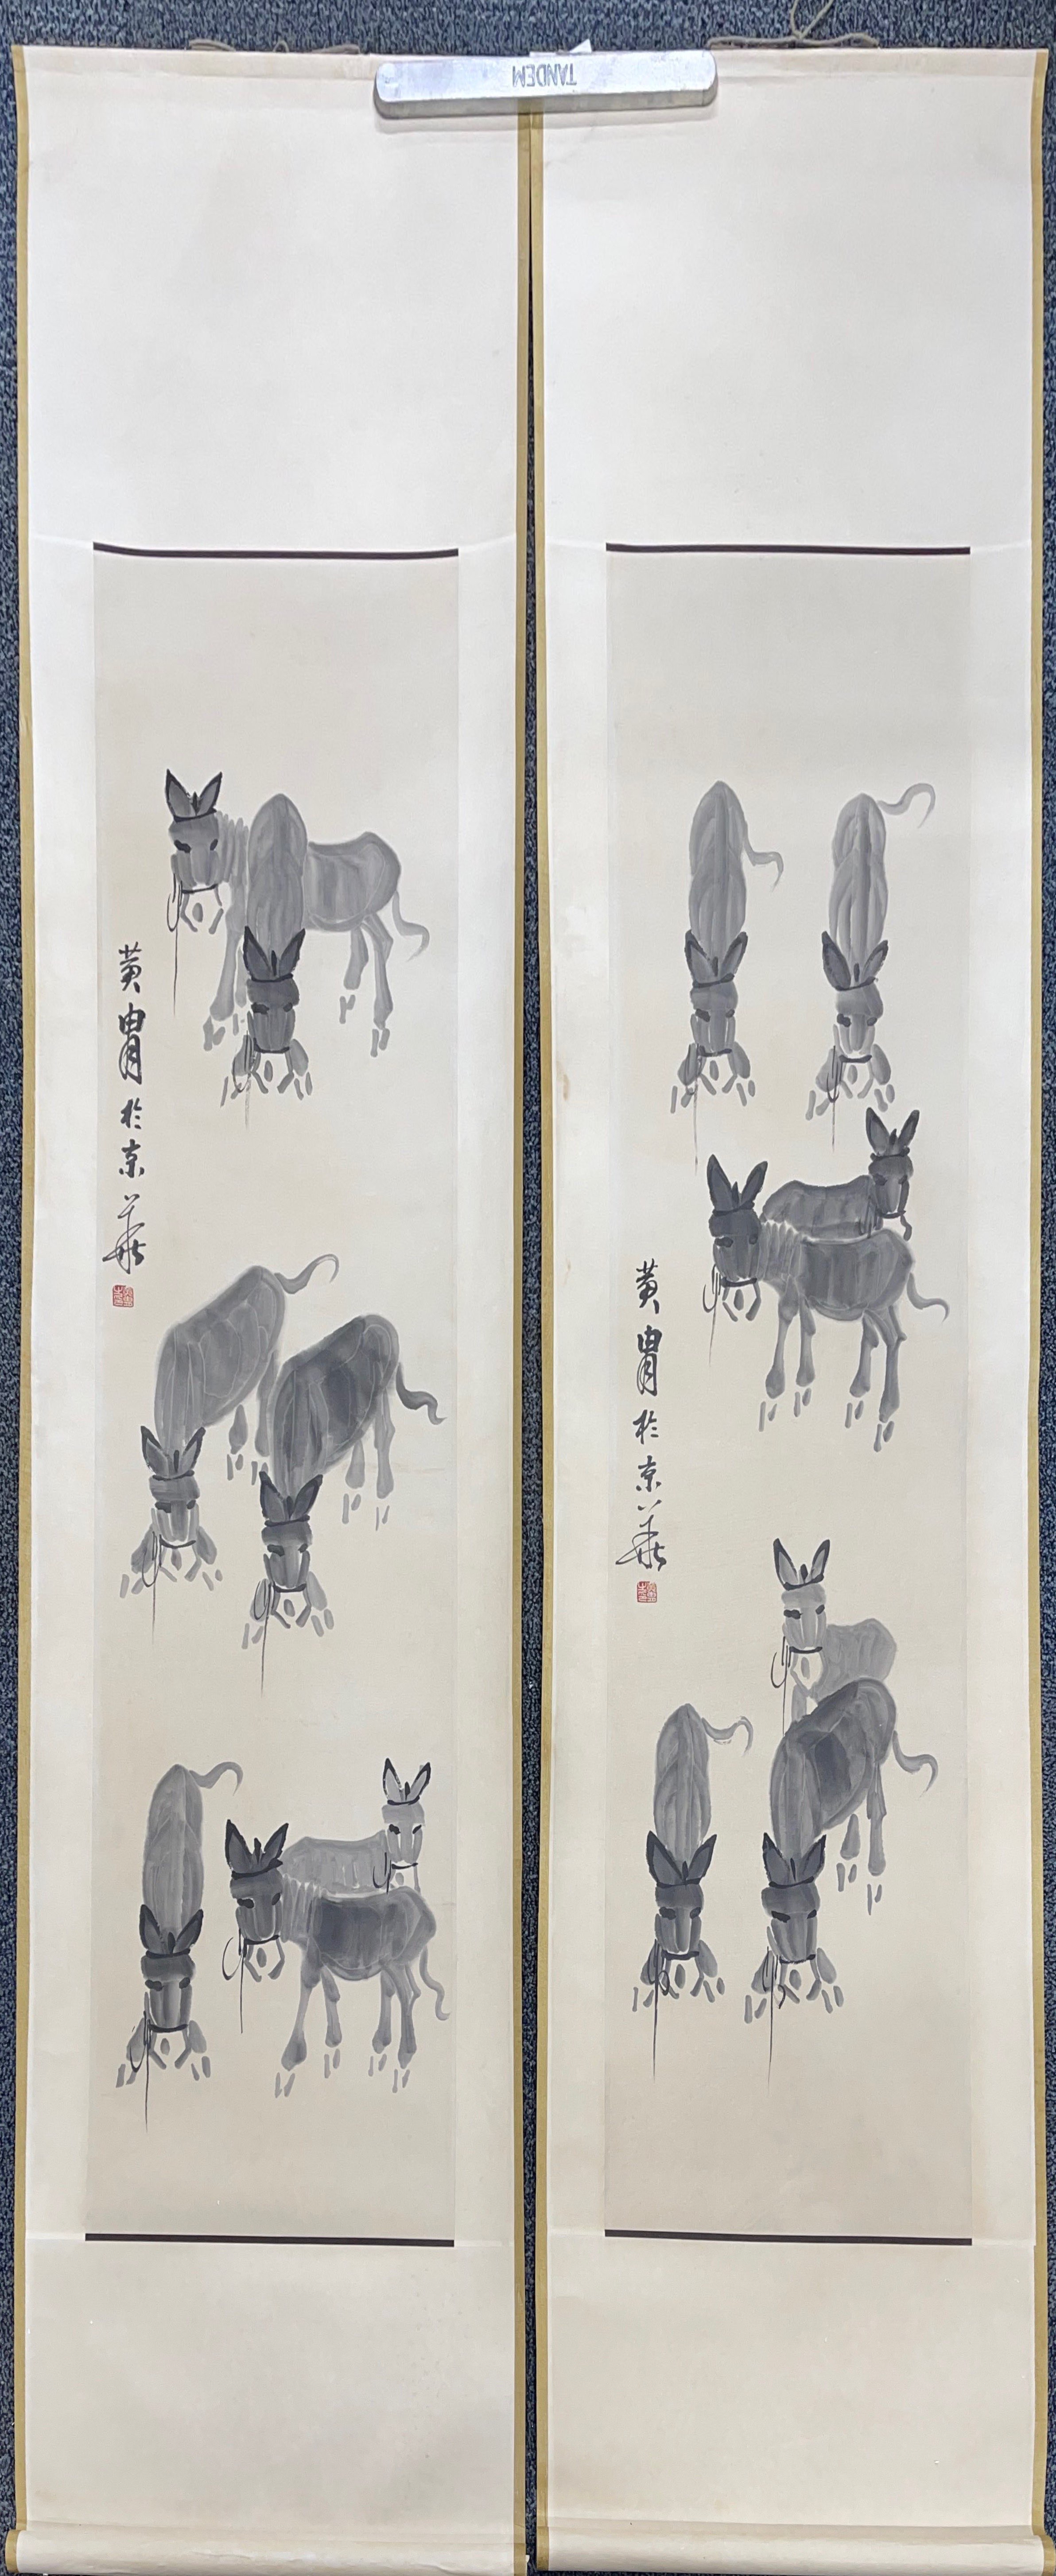 A set of four Chinese ink on paper paintings mounted on scroll, scroll size 46 x 195cm.